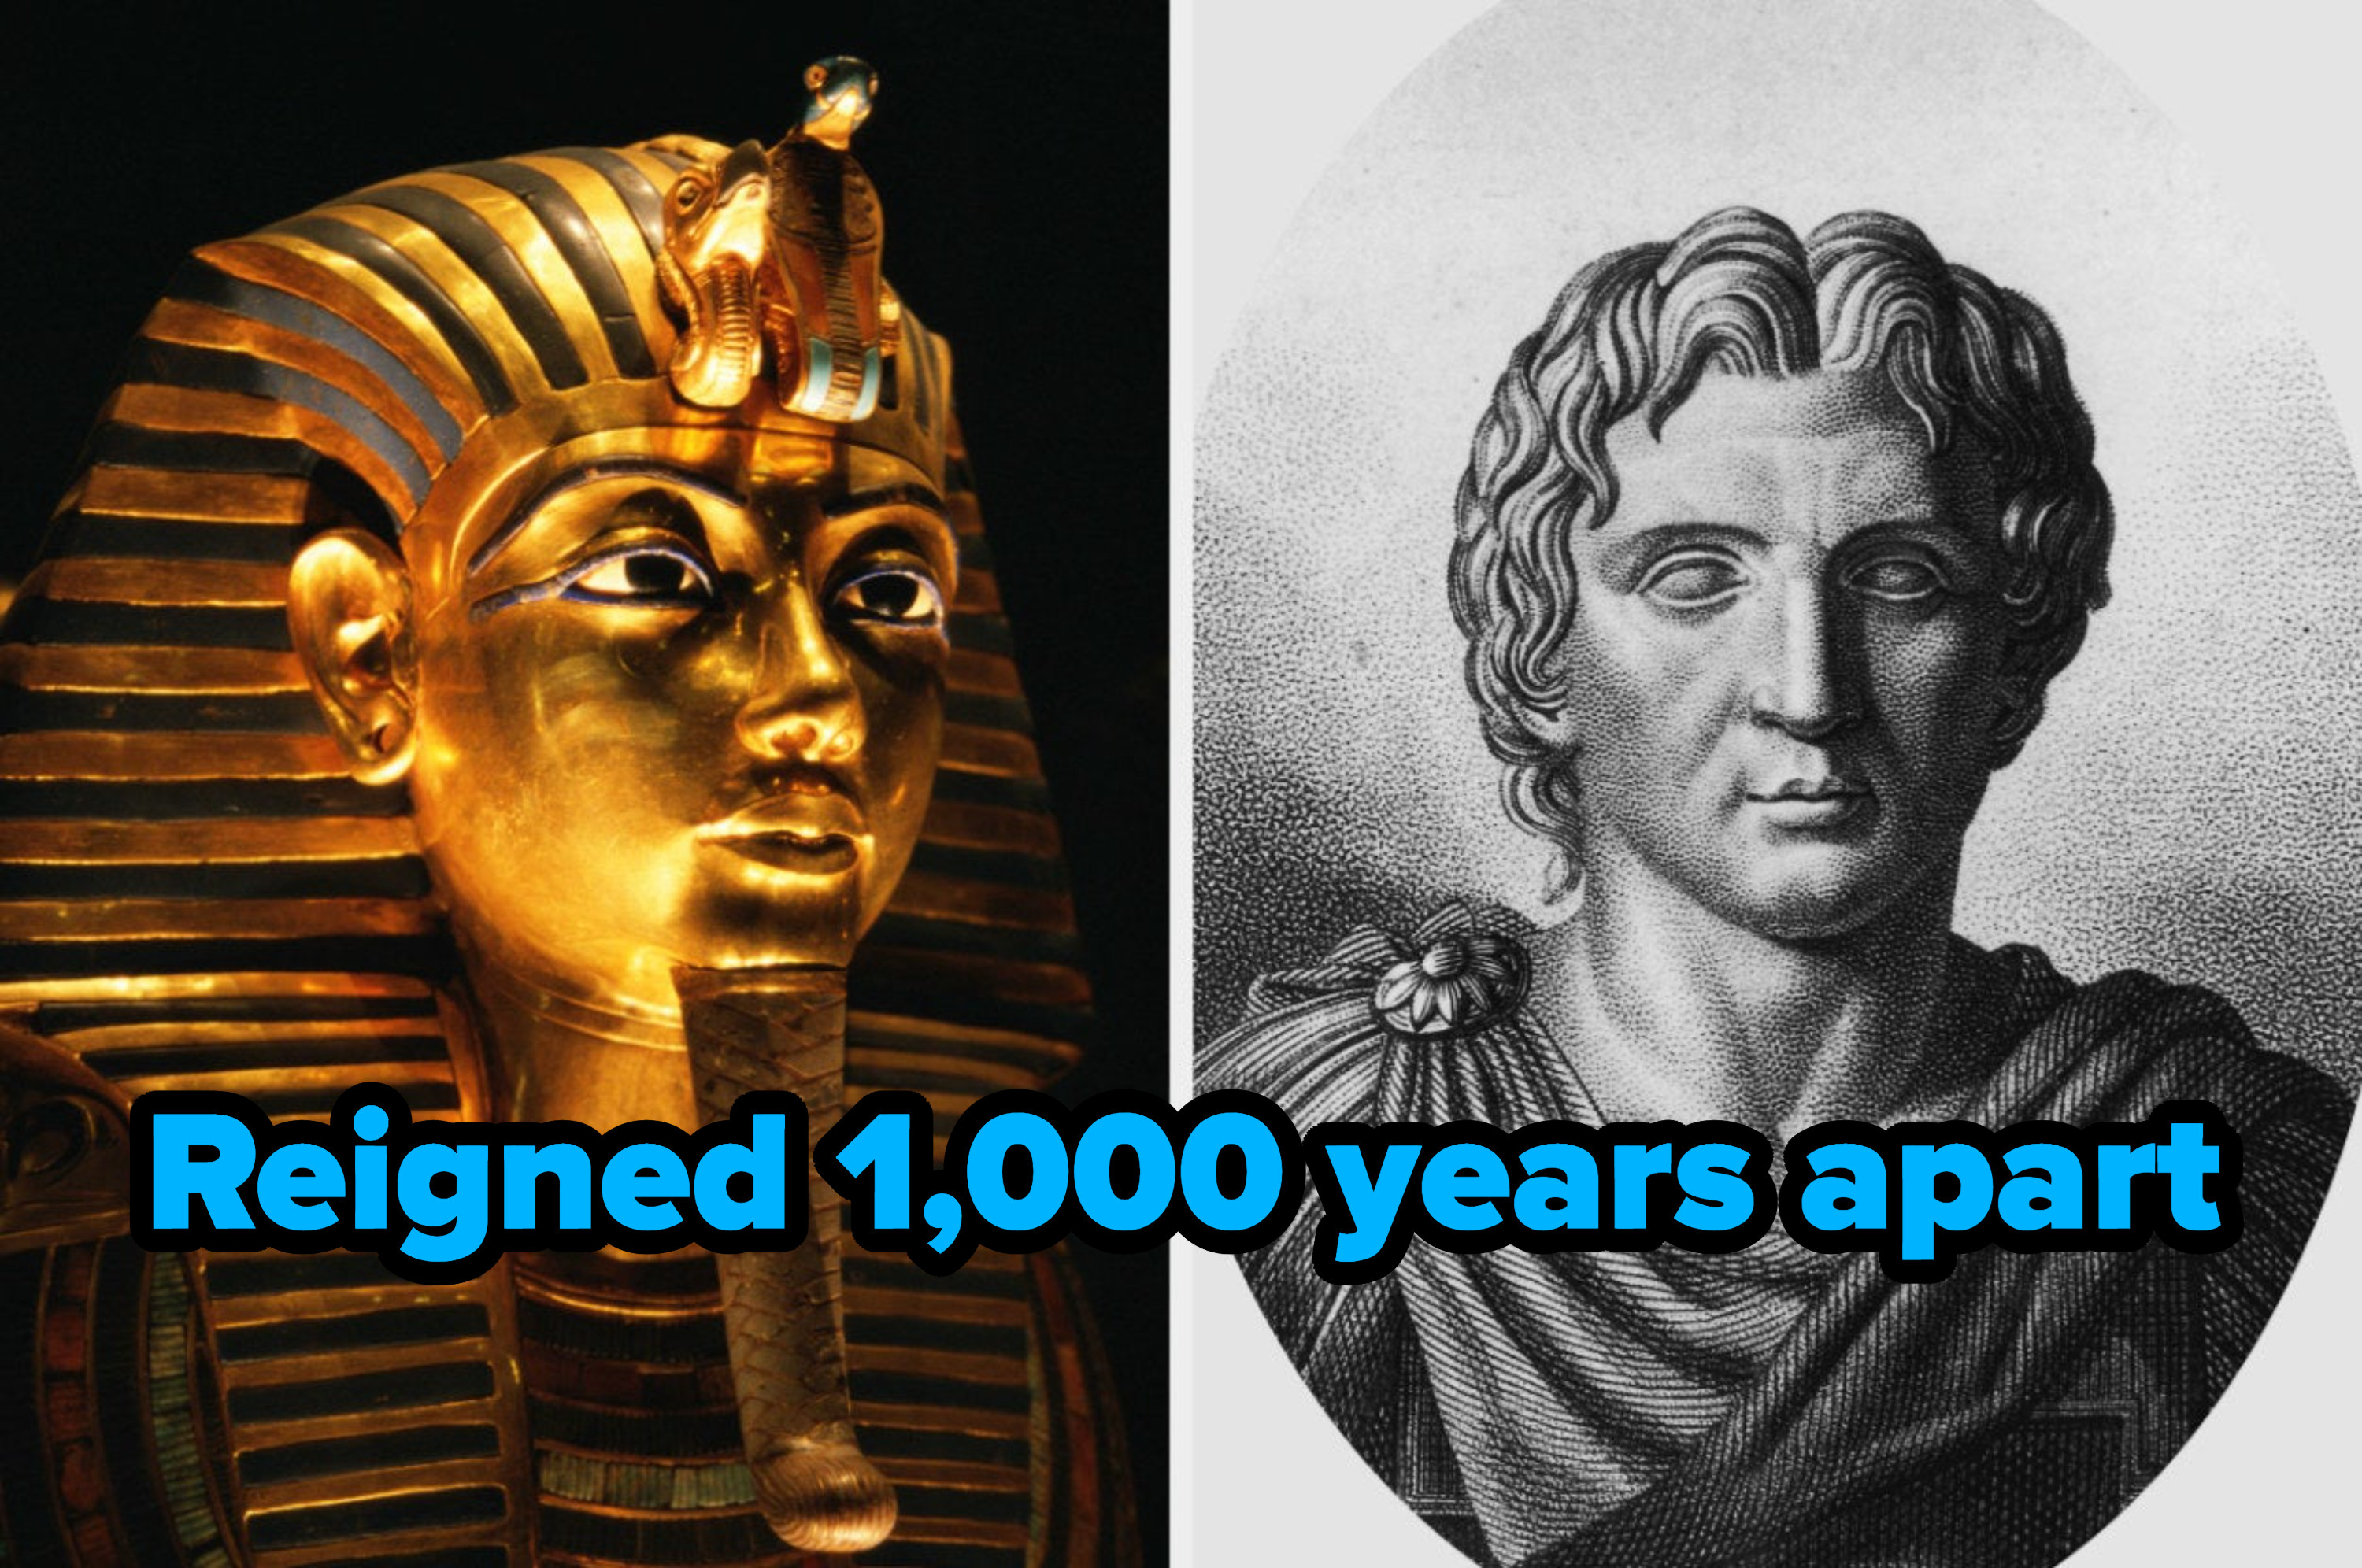 Reigned 1,000 years apart written over King Tutankhamen and Alexander the Great